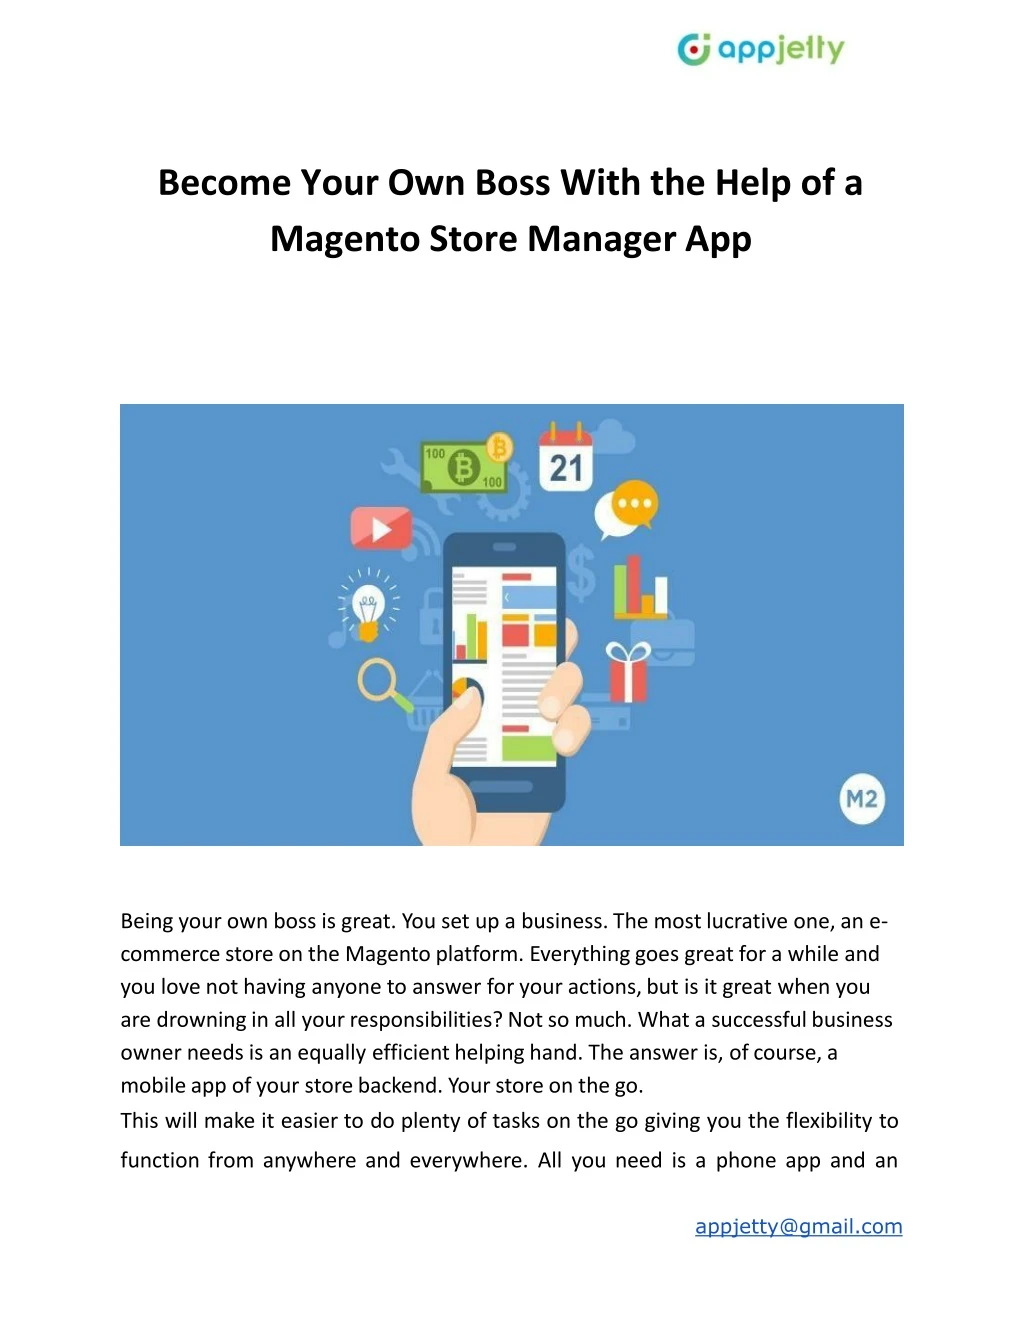 become your own boss with the help of a magento store manager app